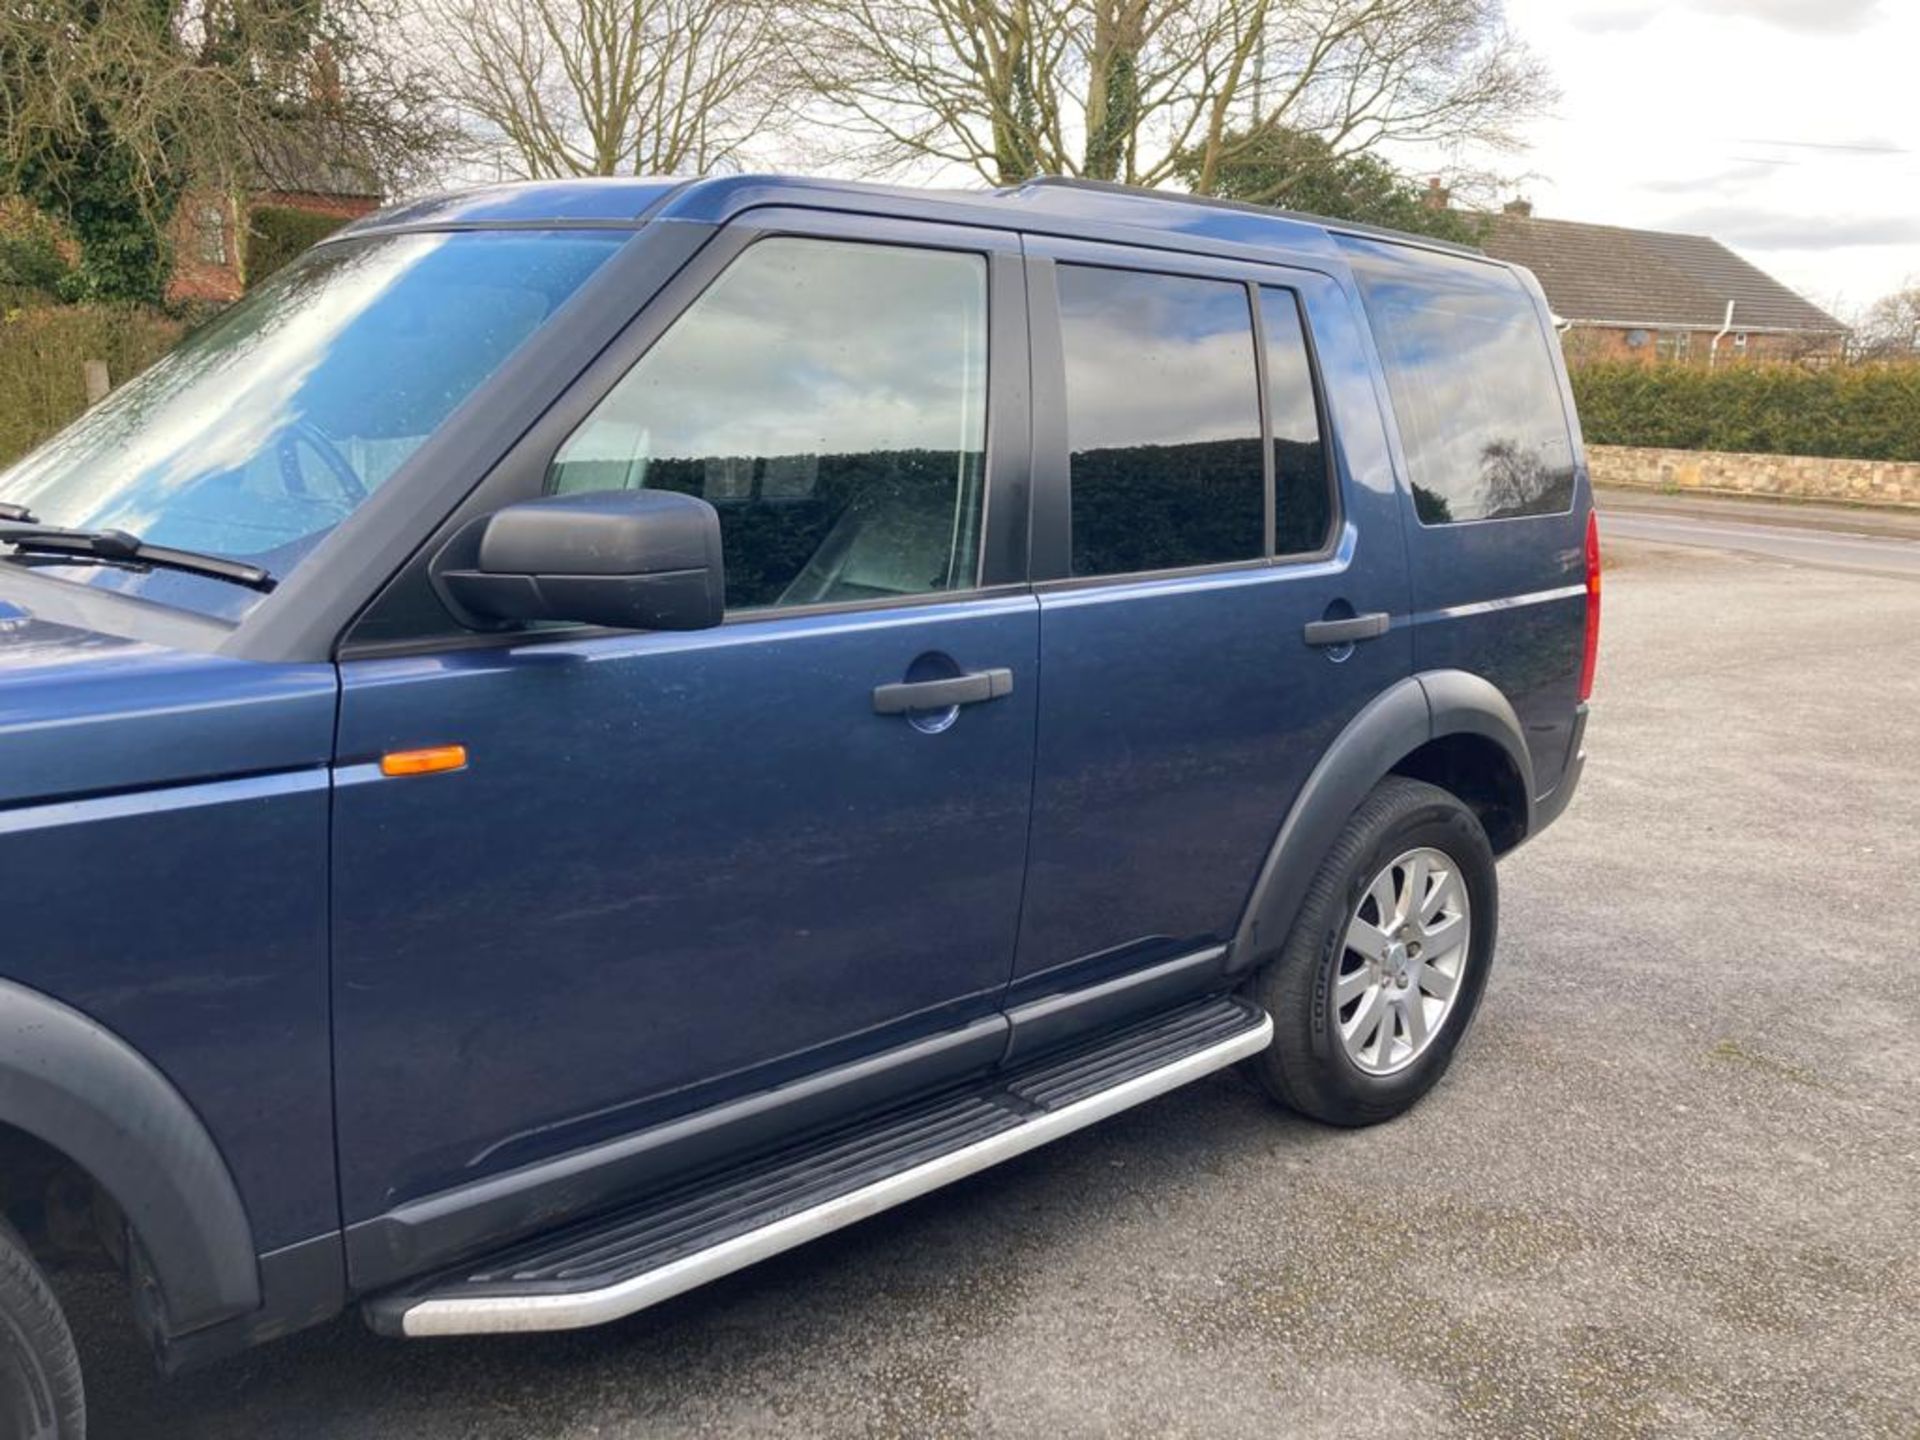 2007/56 REG LAND ROVER DISCOVERY 3 TDV6 SE AUTOMATIC 2.7 DIESEL, SHOWING 4 FORMER KEEPERS *NO VAT* - Image 5 of 16